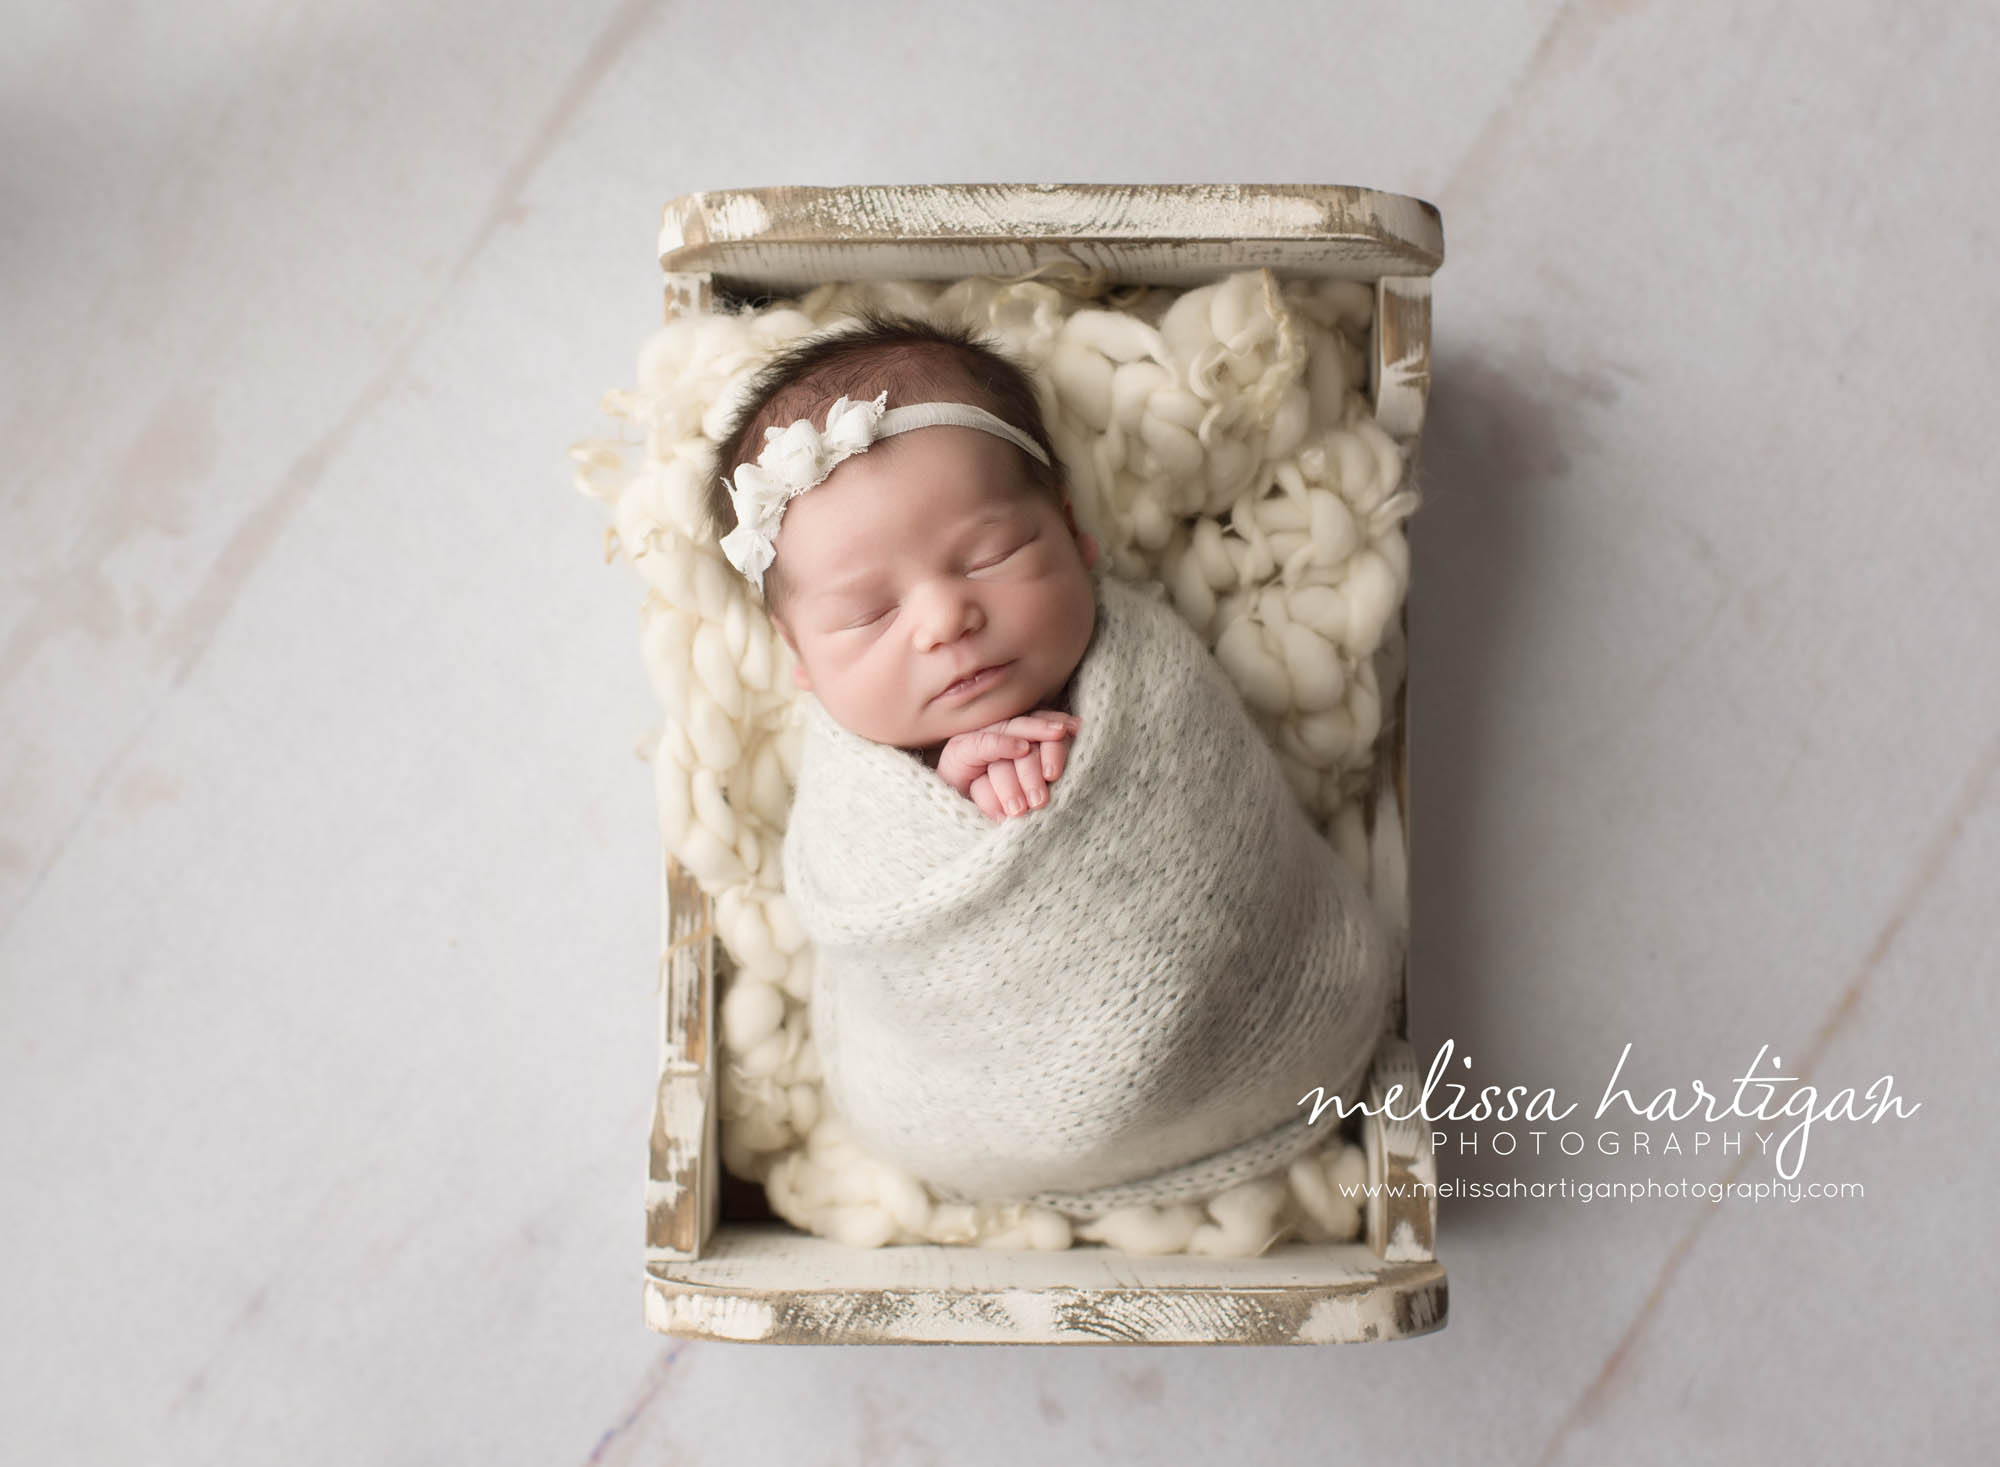 Melissa Hartigan Photography CT Newborn Photographer Emerson CT Newborn Session baby girl sleeping in white wooden bed wrapped in cream knit with white floral headband